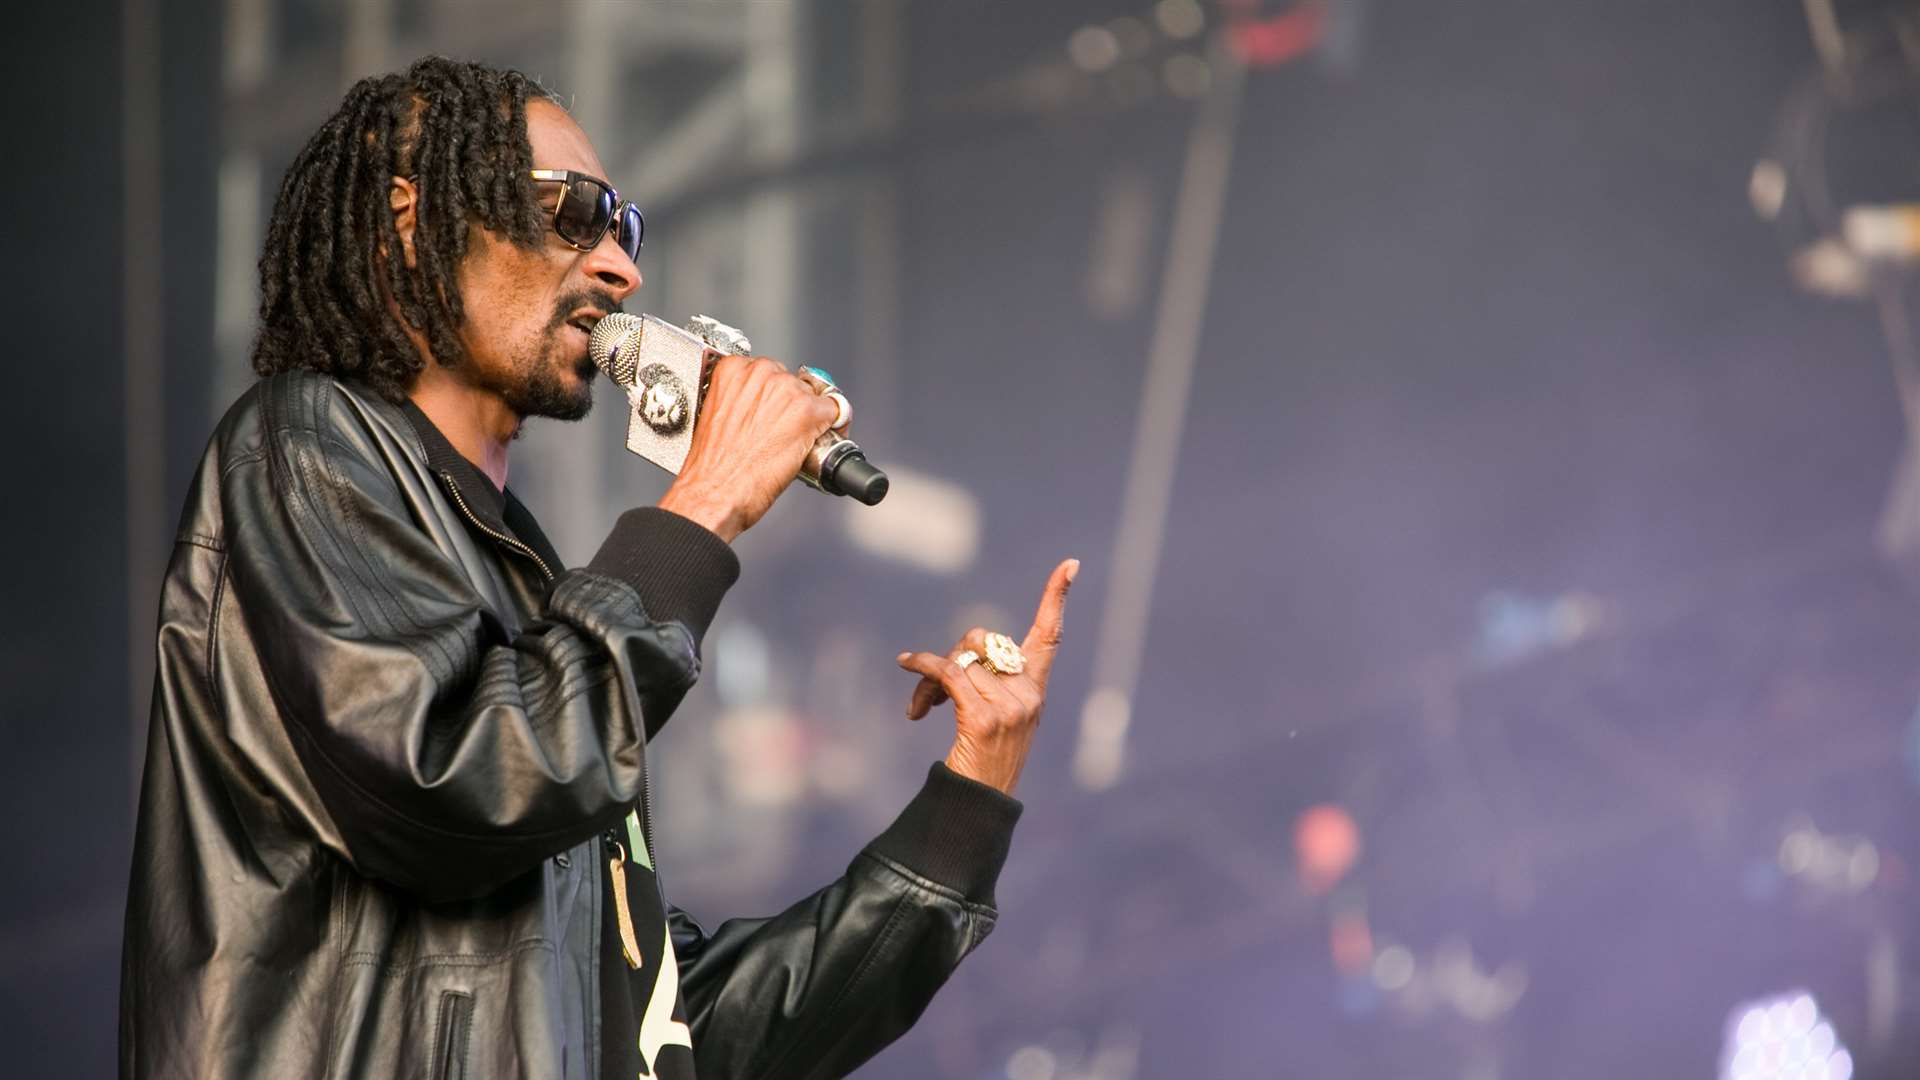 Rapper Snoop Dogg appears in the film